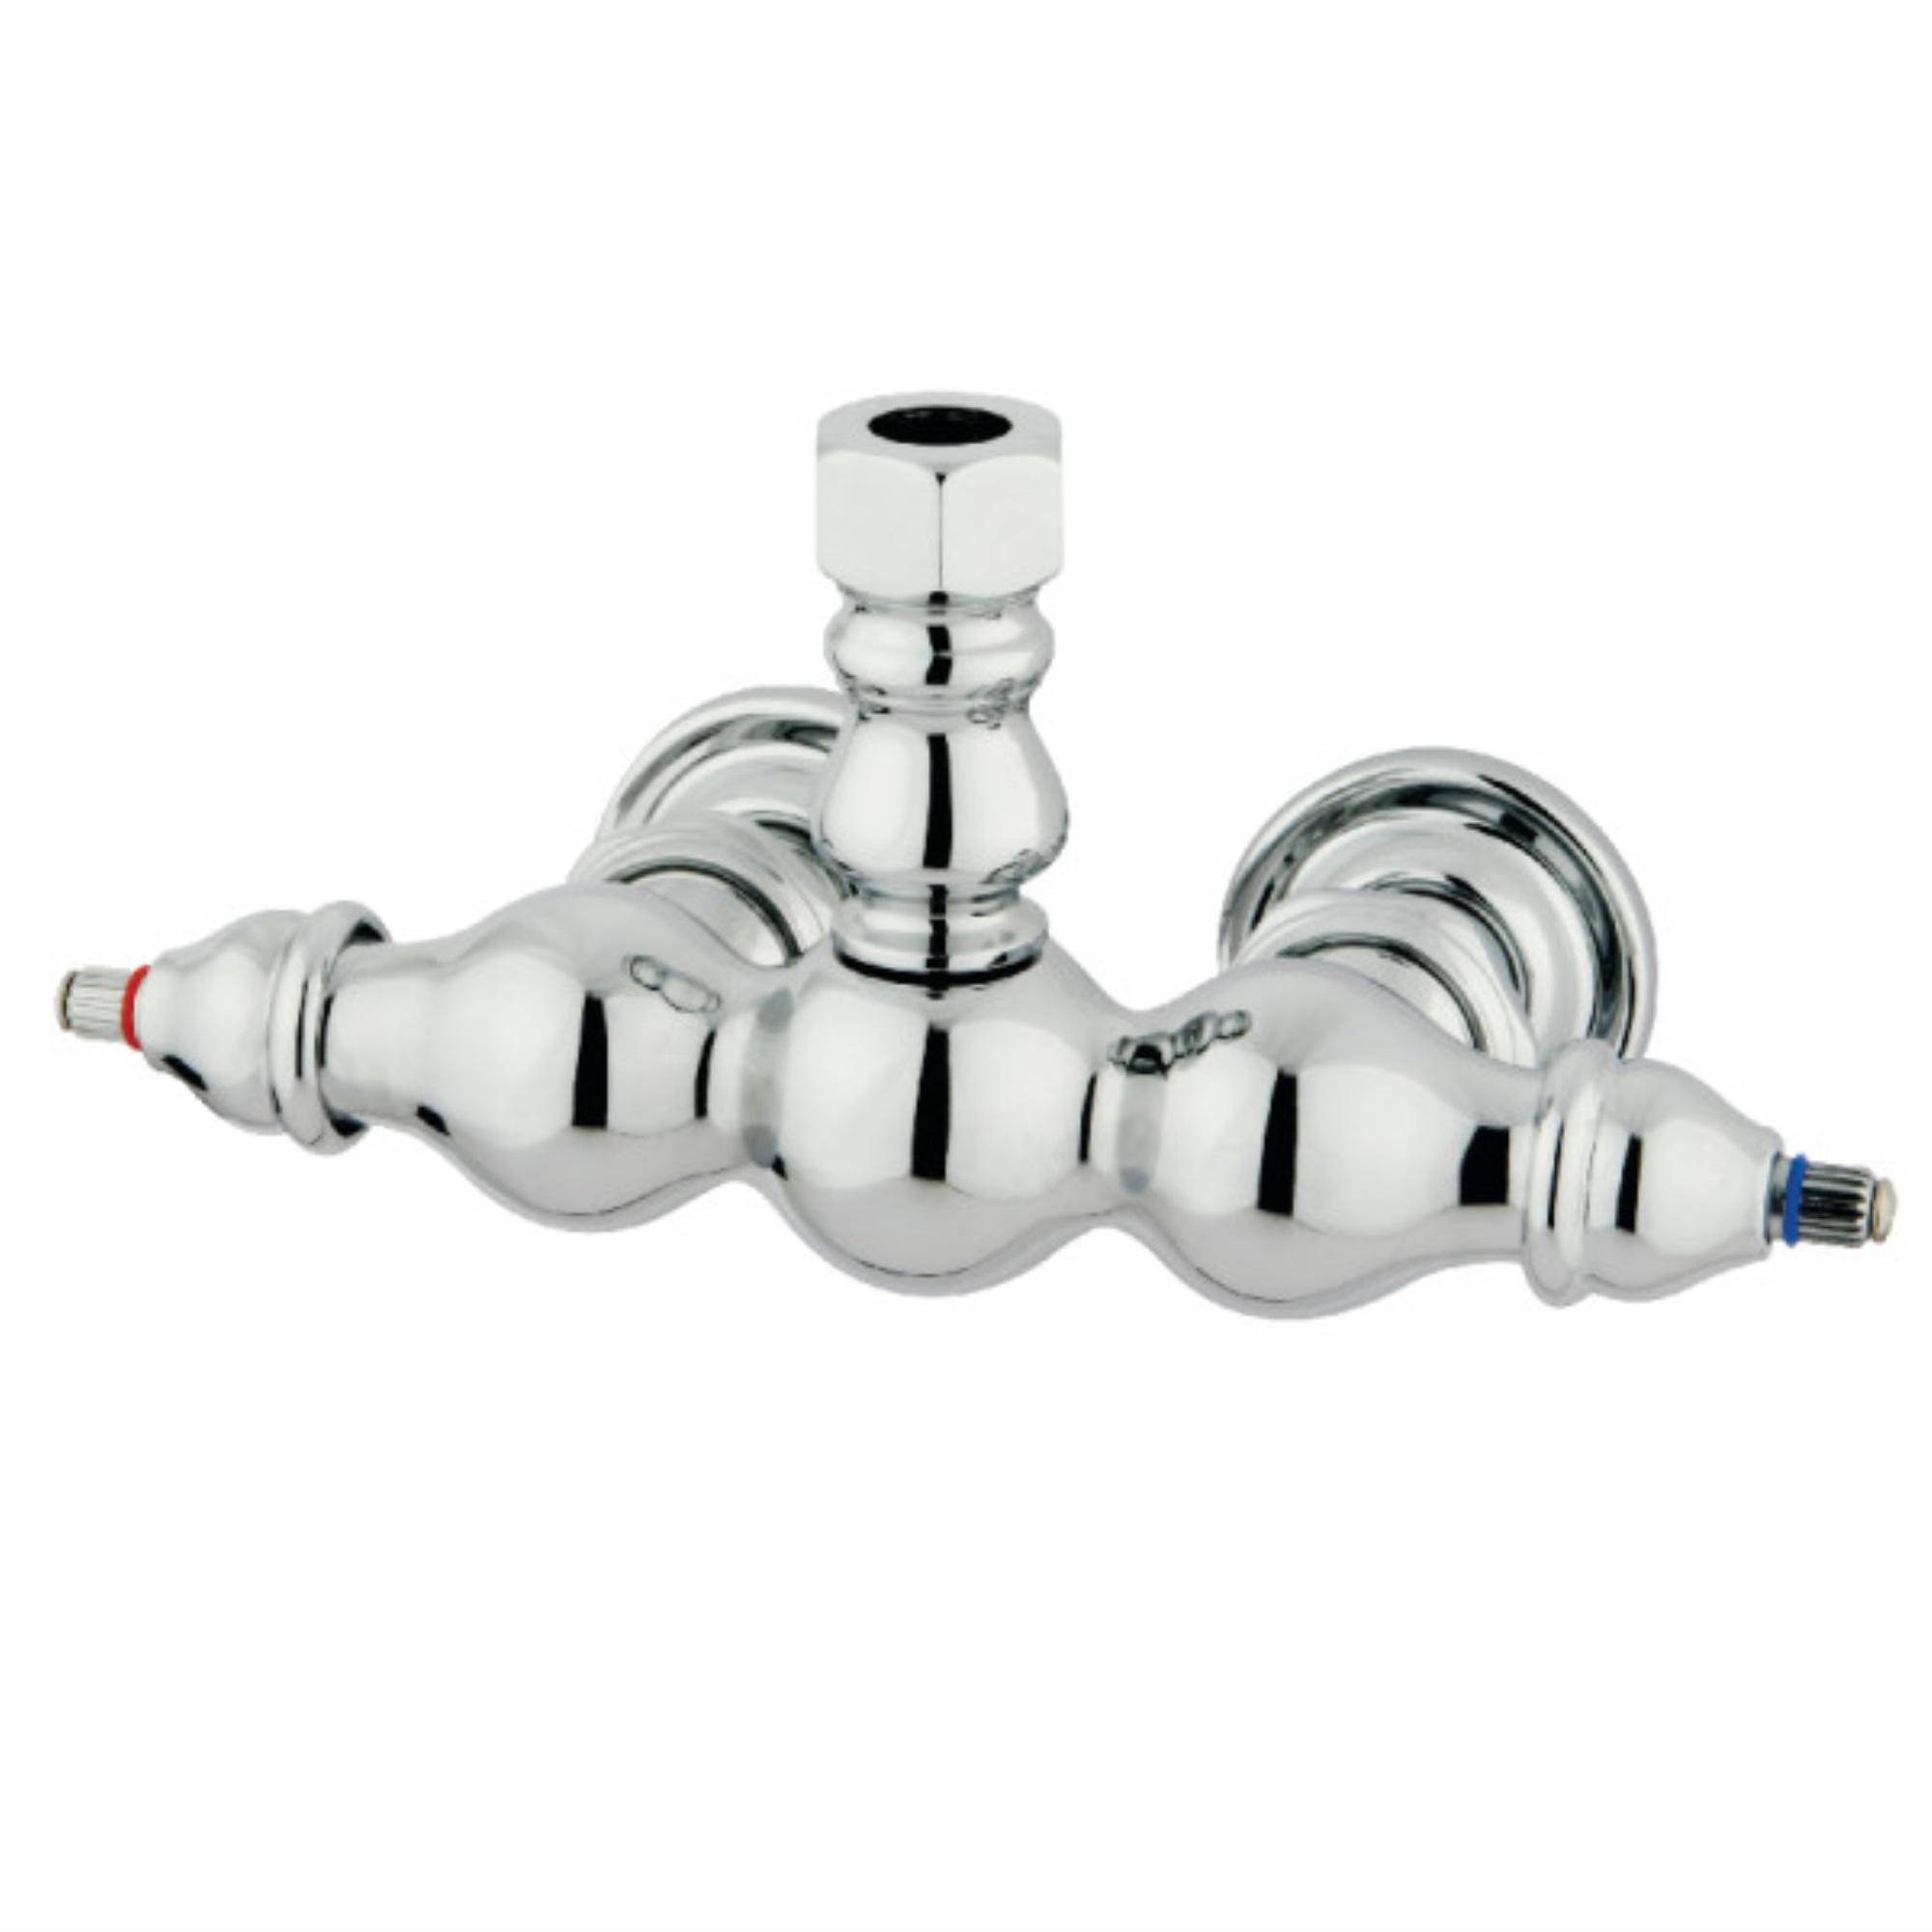 Kingston Brass ABT700-1 Faucet Body Only, Polished Chrome